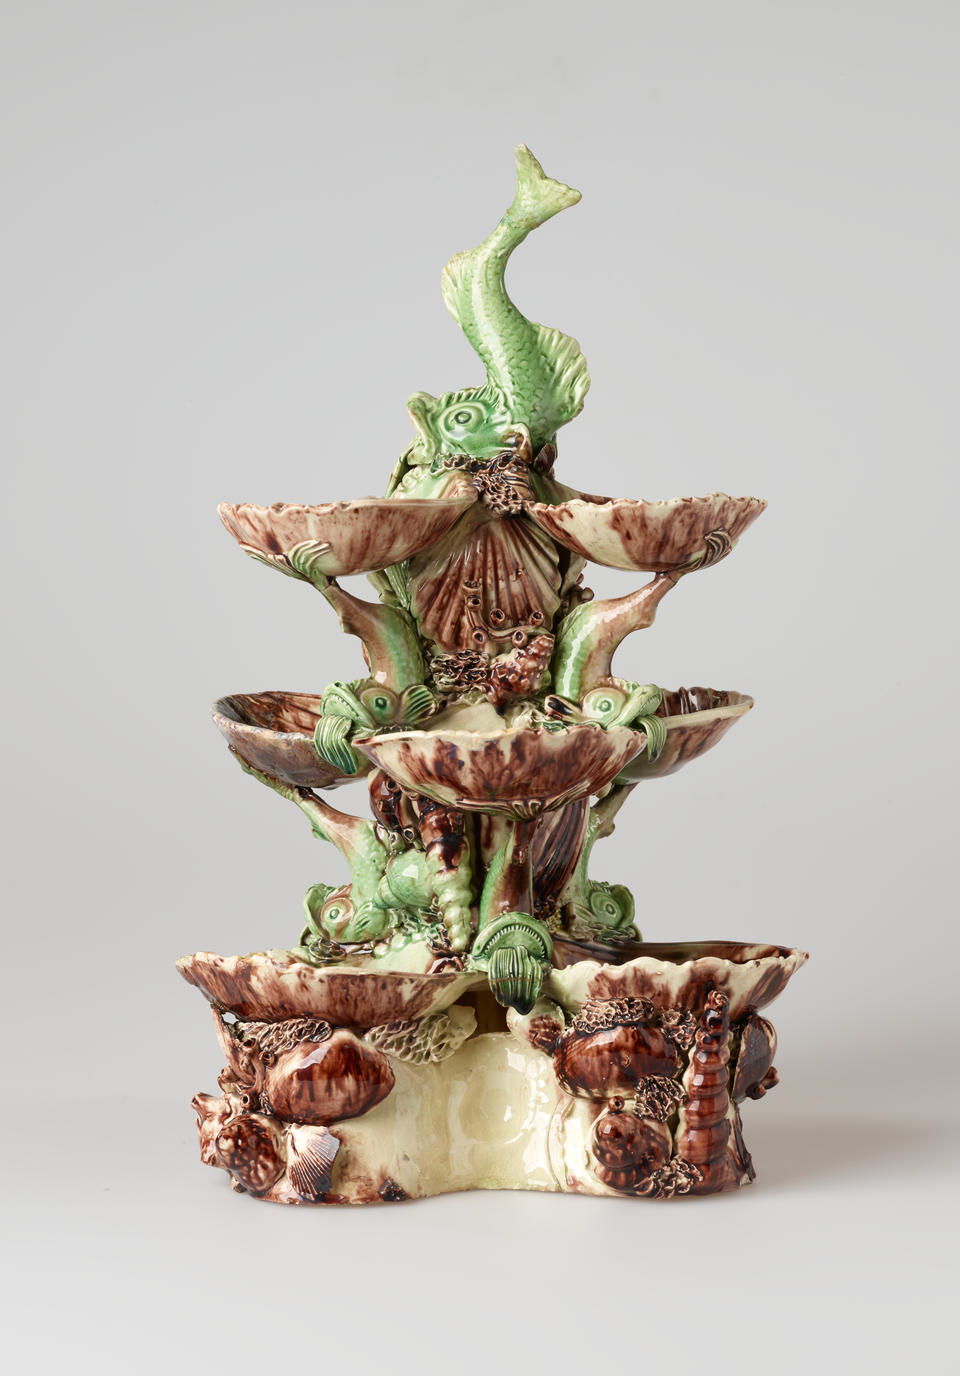 An elaborate sculptural three tiered sweetmeat dish that is dark purple, green, and cream glaze with floral decorations as well as sculpted fish decorations.